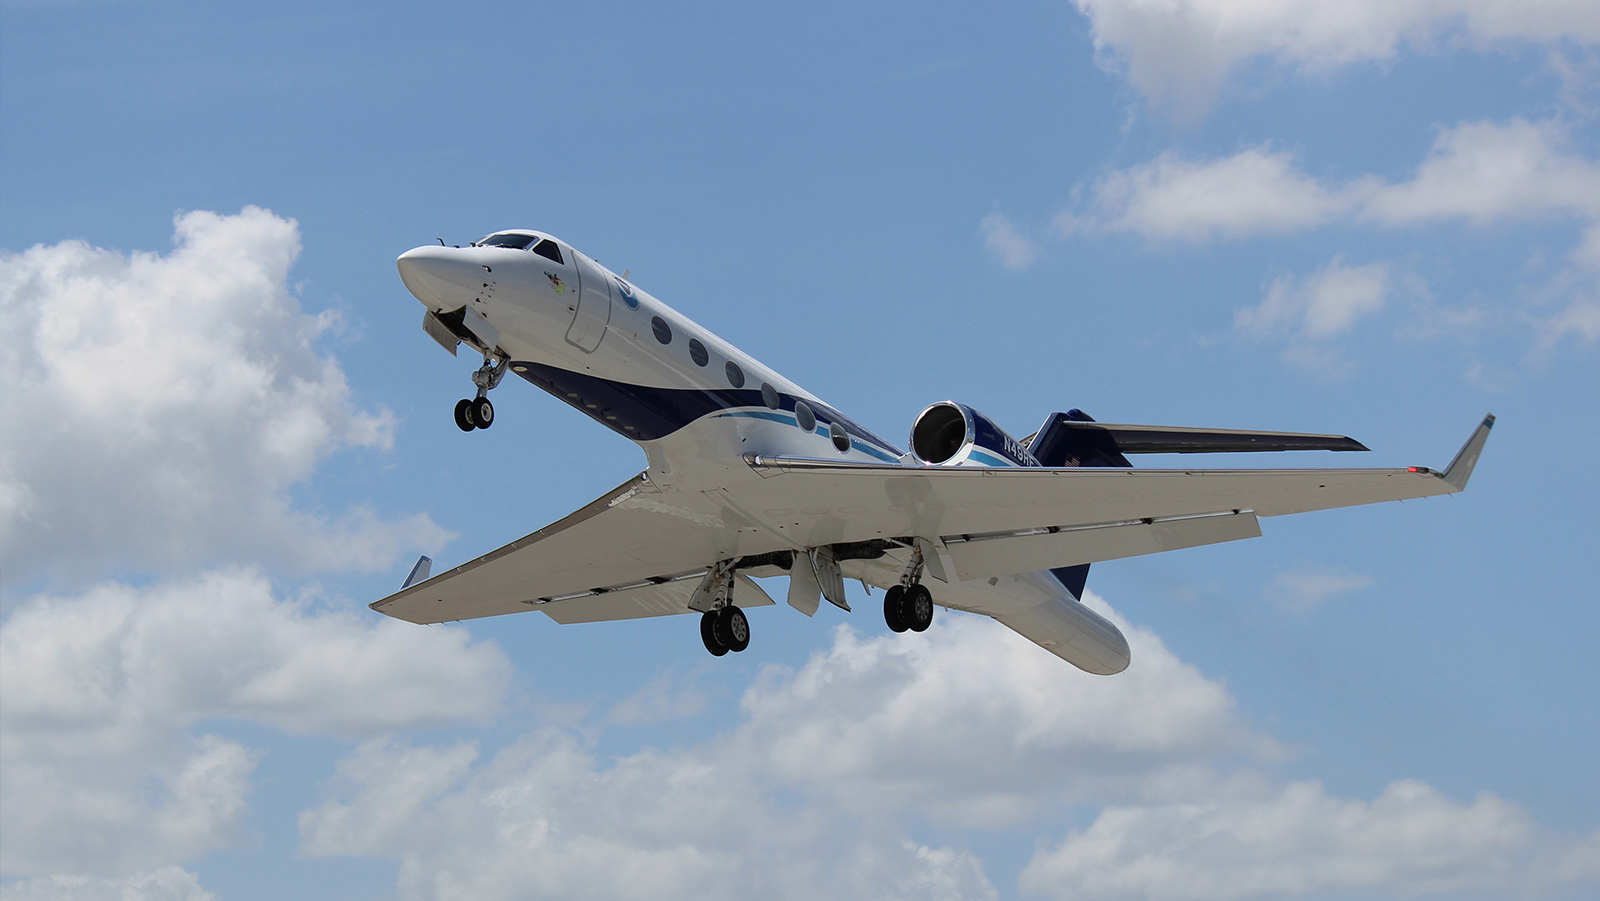 NOAA G-IV aircraft flying overhead with blue sky and clouds in the background